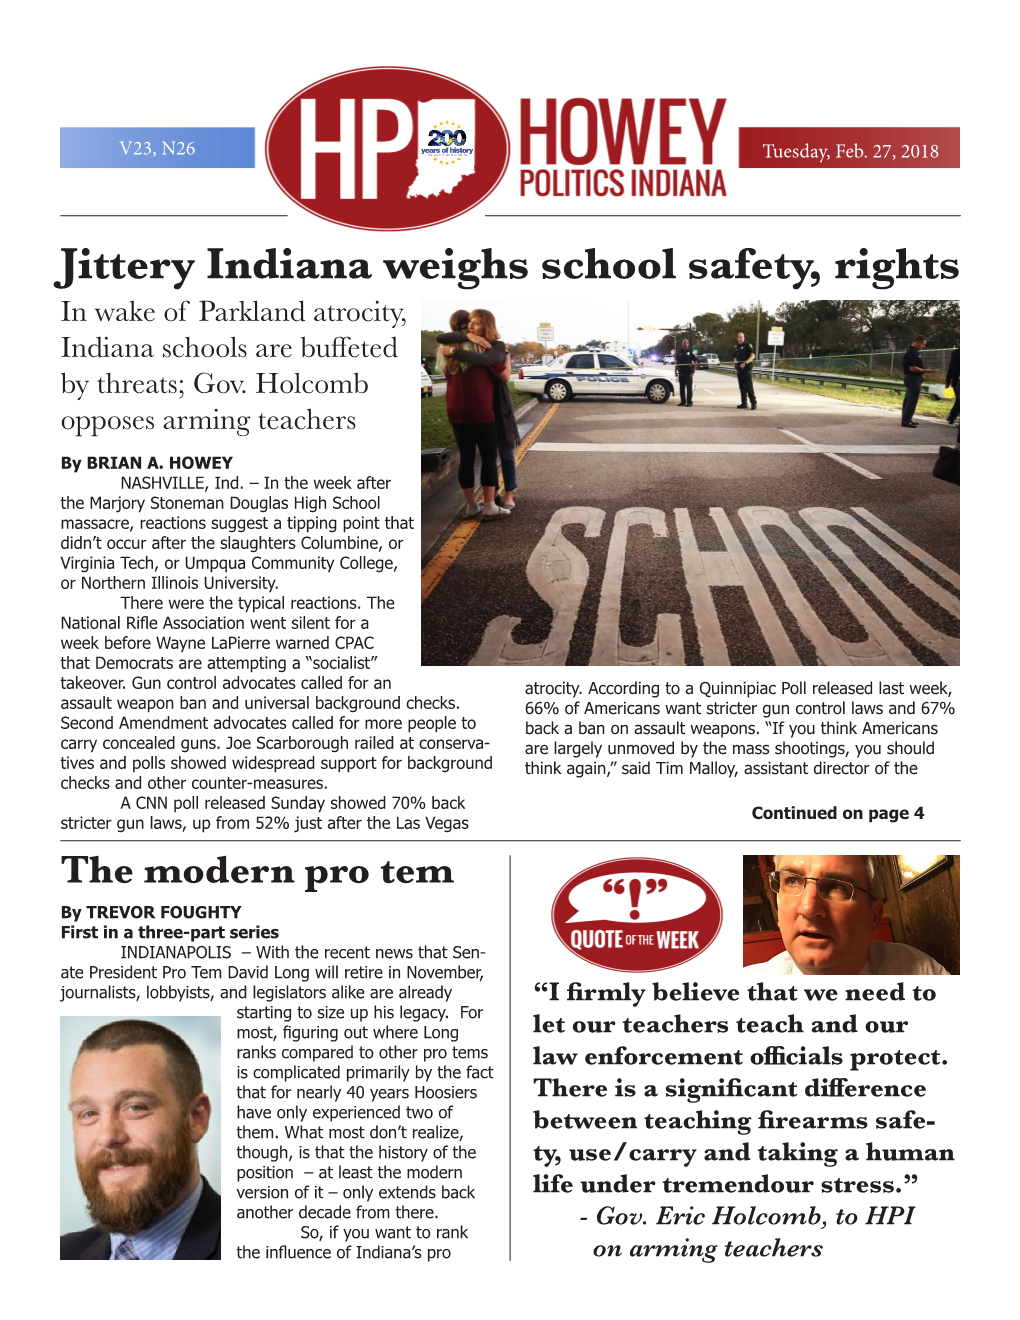 Jittery Indiana Weighs School Safety, Rights in Wake of Parkland Atrocity, Indiana Schools Are Buffeted by Threats; Gov